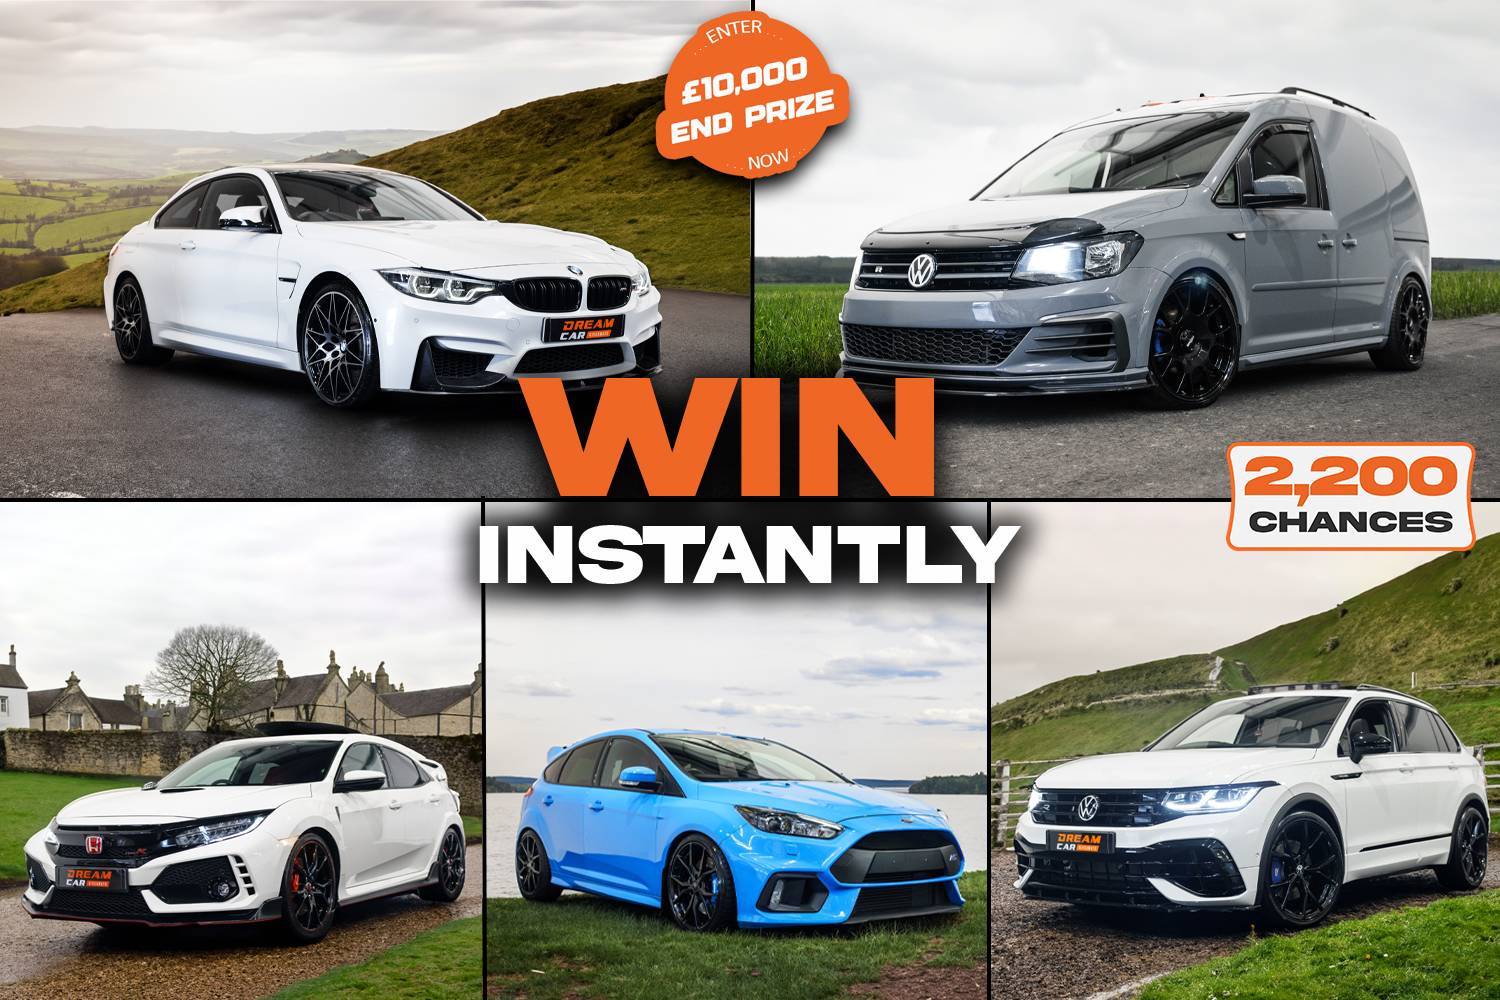 WIN INSTANTLY! 2200 Prizes / 5 Cars & £10,000 End Prize